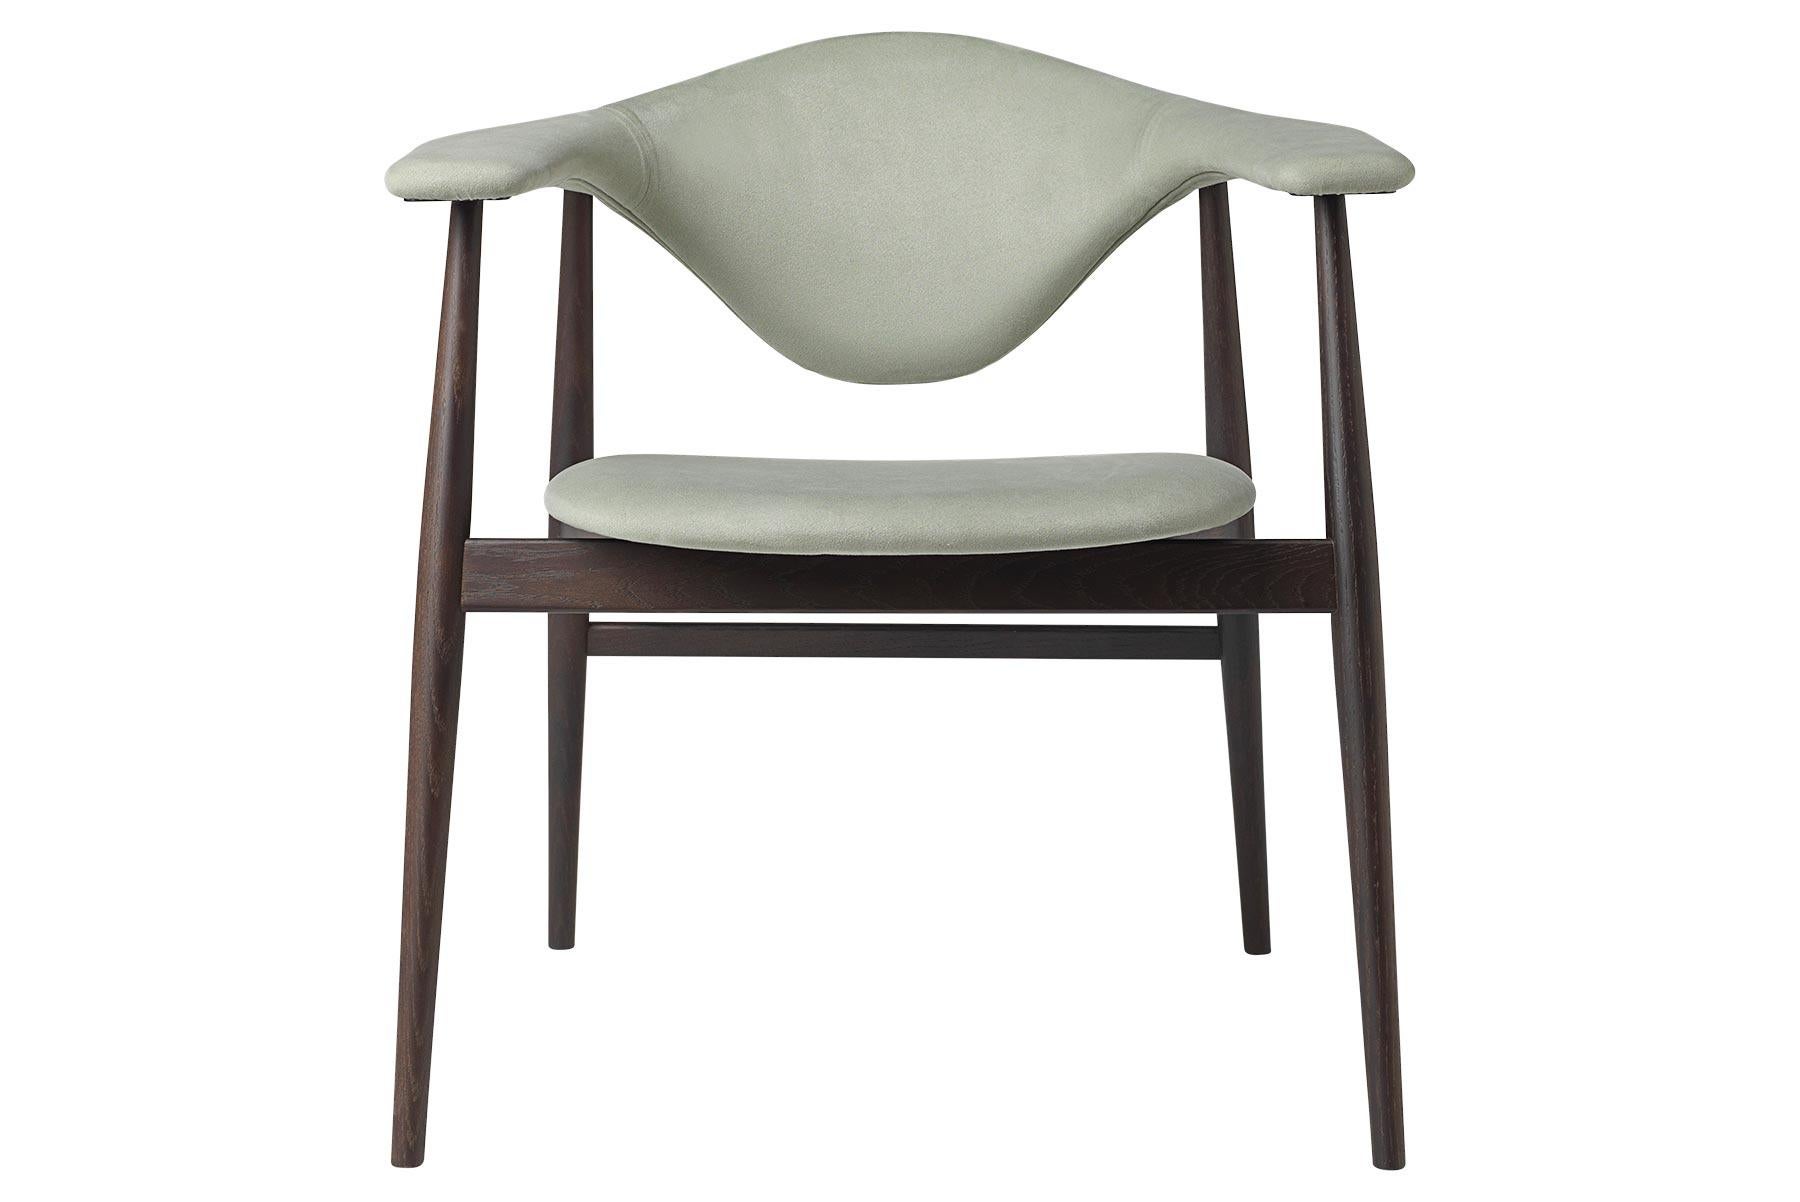 Masculo Dining Chair, Fully Upholstered, Smoked Oak Base In New Condition For Sale In Berkeley, CA